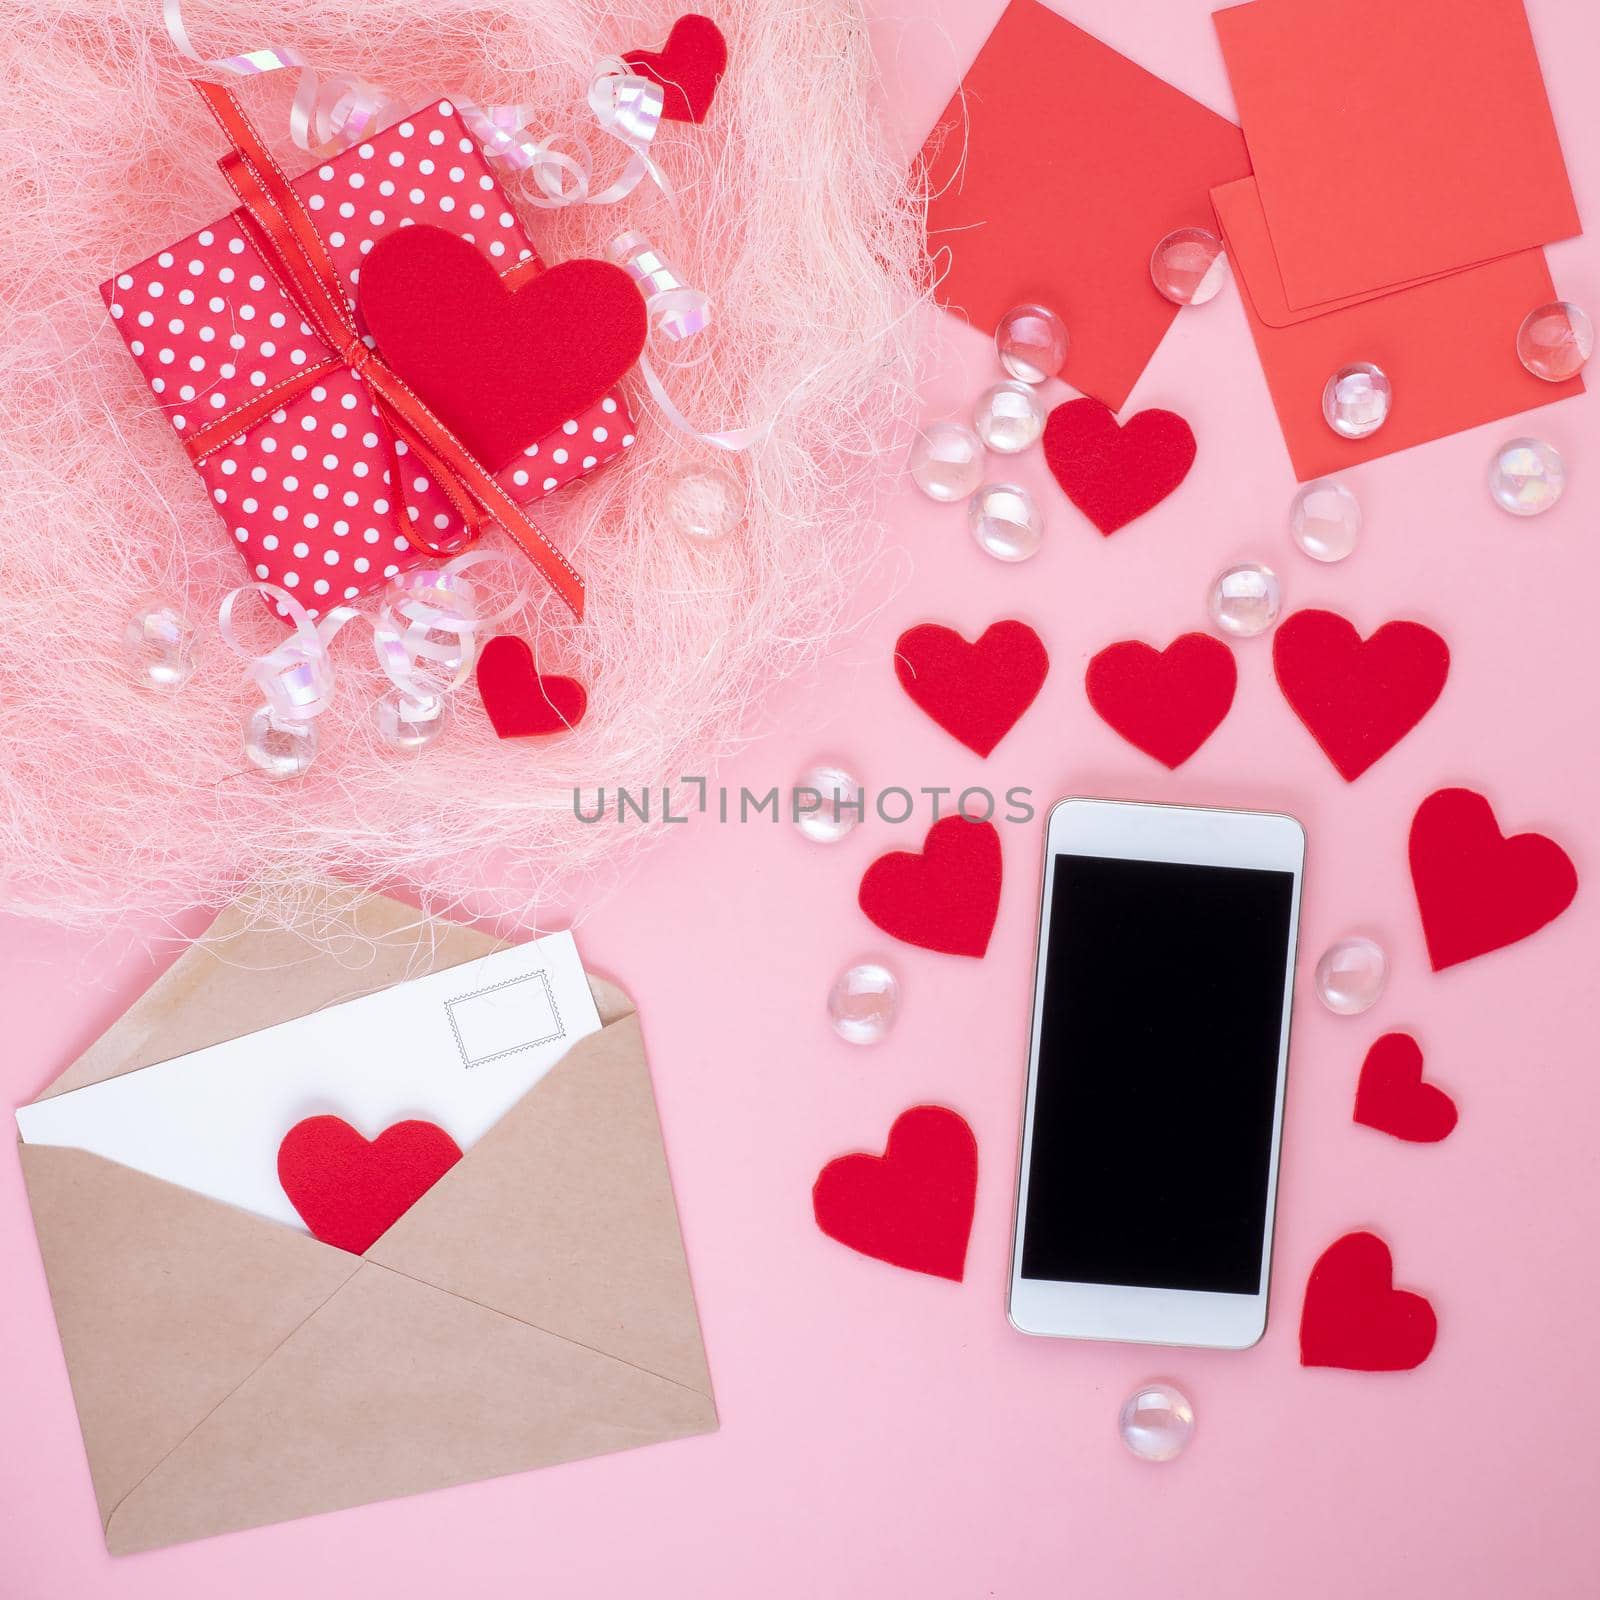 gift in red gift box with bow, smart phone, envelope, card, red heart, pink background, top view, copy space by NataBene